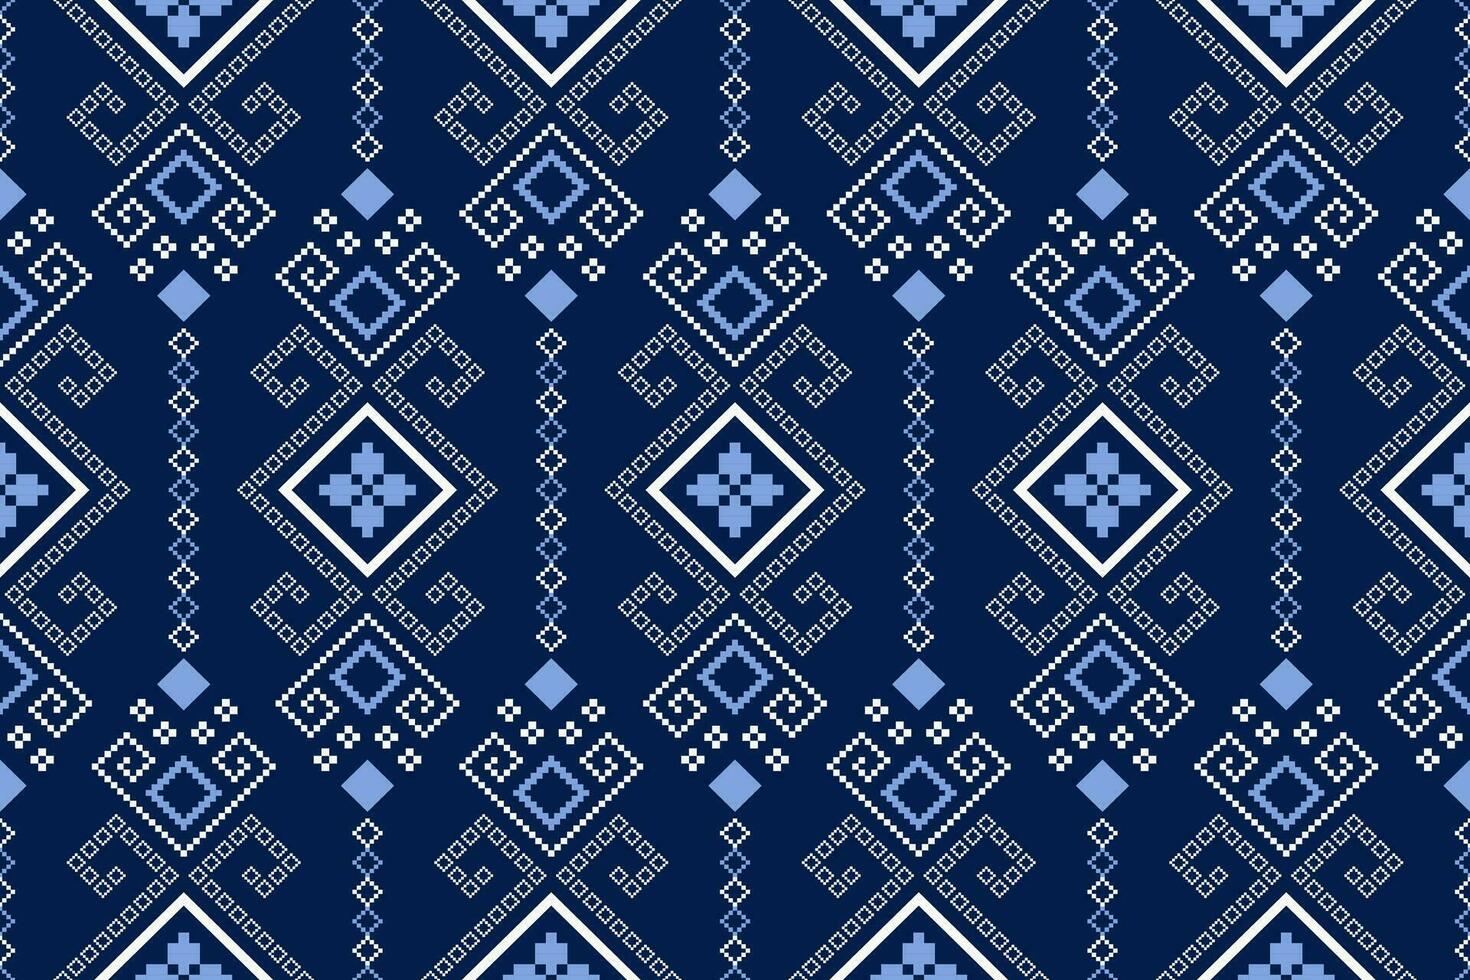 Indigo navy blue geometric traditional ethnic pattern Ikat seamless pattern border abstract design for fabric print cloth dress carpet curtains and sarong Aztec African Indian Indonesian vector